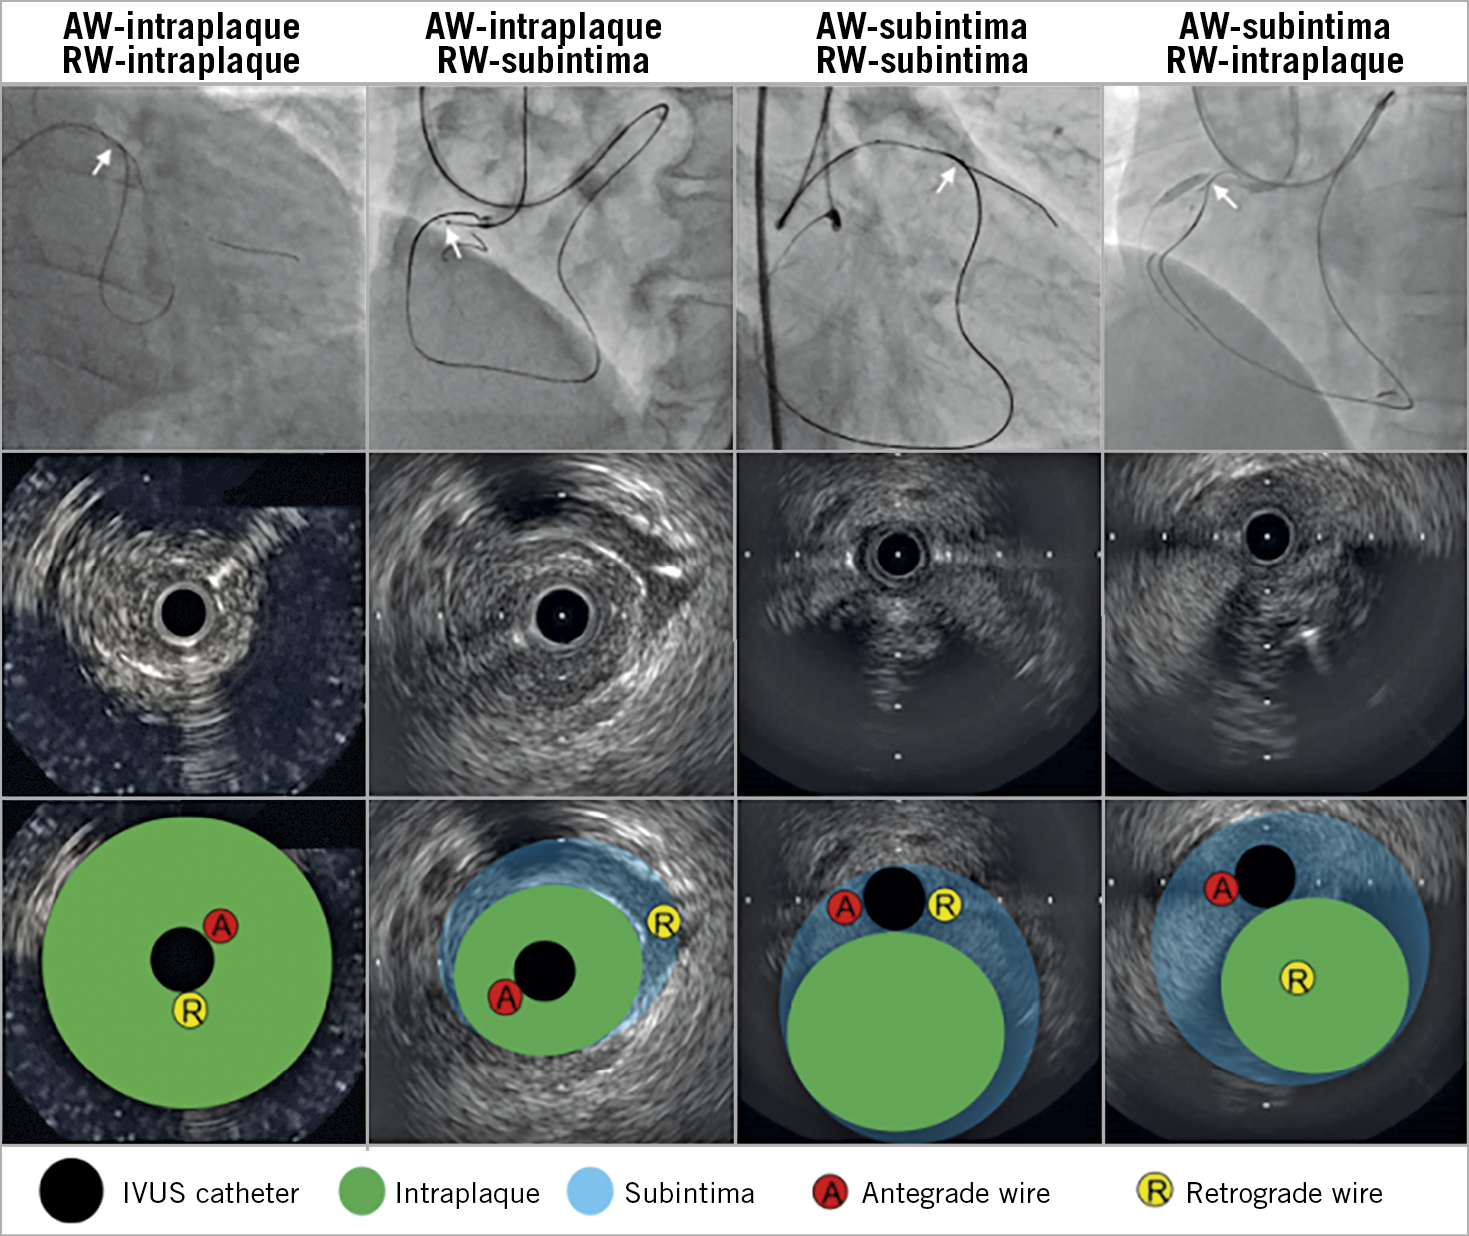 Figure 2. Four patterns of antegrade and retrograde wire positions. In the top panels, angiography shows overlapped AW and RW. White arrows indicate IVUS location. Middle panels show corresponding IVUS images; bottom panels show the same IVUS images with annotation. AW: antegrade wire; IVUS: intravascular ultrasound; RW: retrograde wire